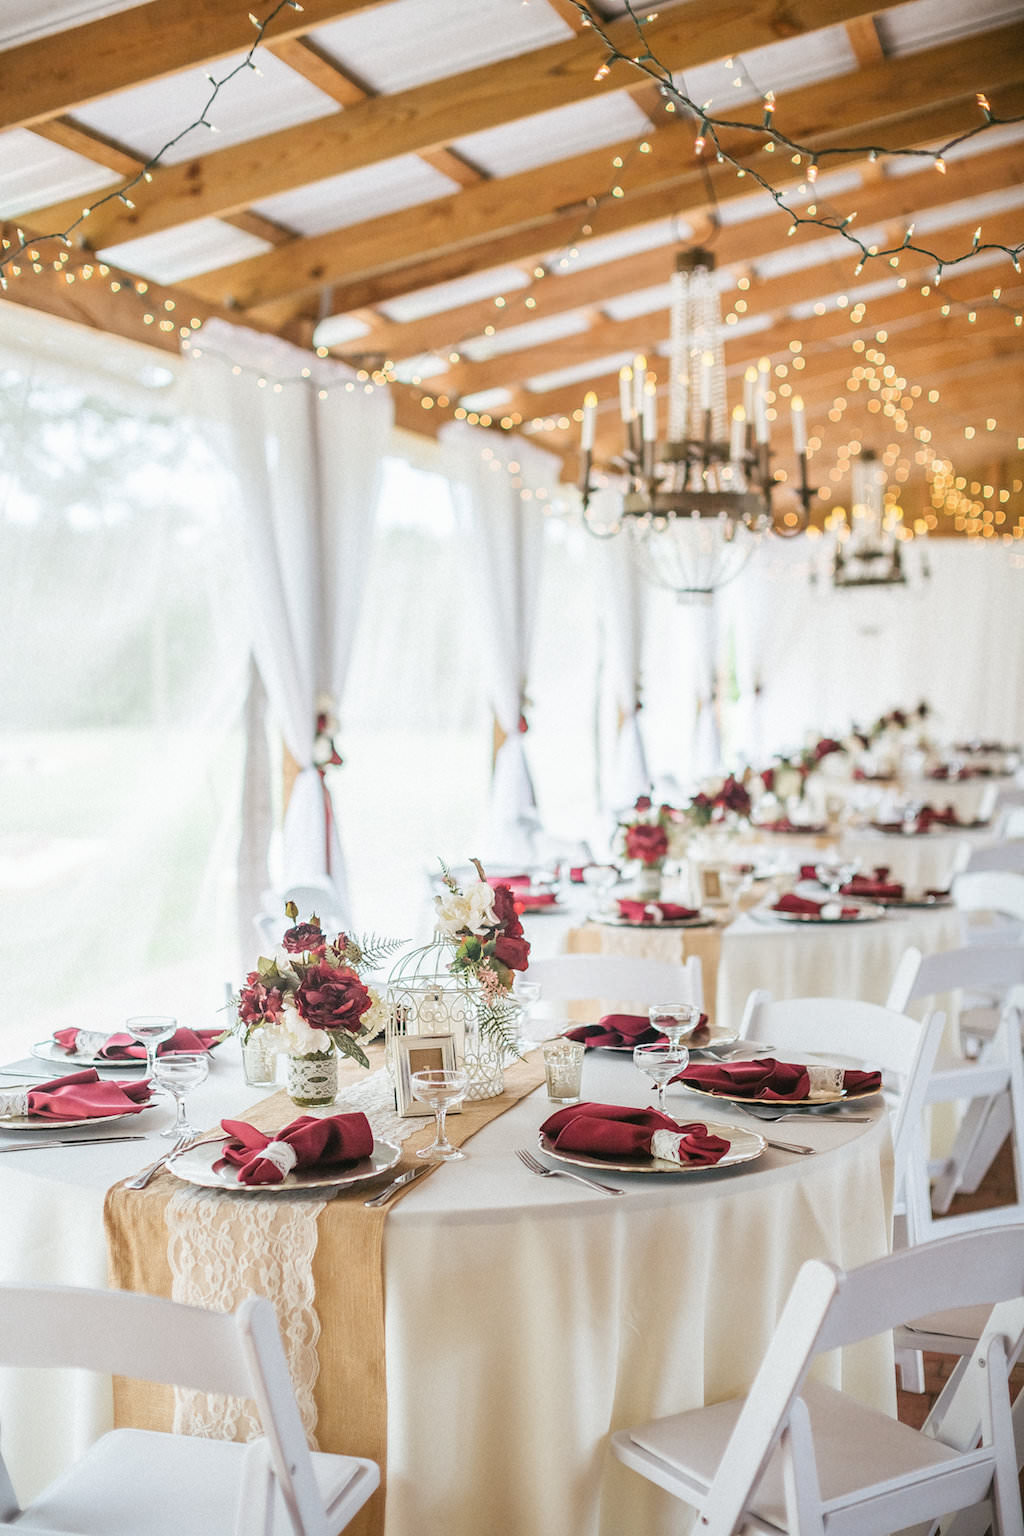 Rustic Barn Wedding Reception with String LIghts, Chandeliers, Burlap and Lace Runners on Cream Linen with Burgundy Napkins and Red Rose Centerpieces in Mason Jars with White Folding Chairs